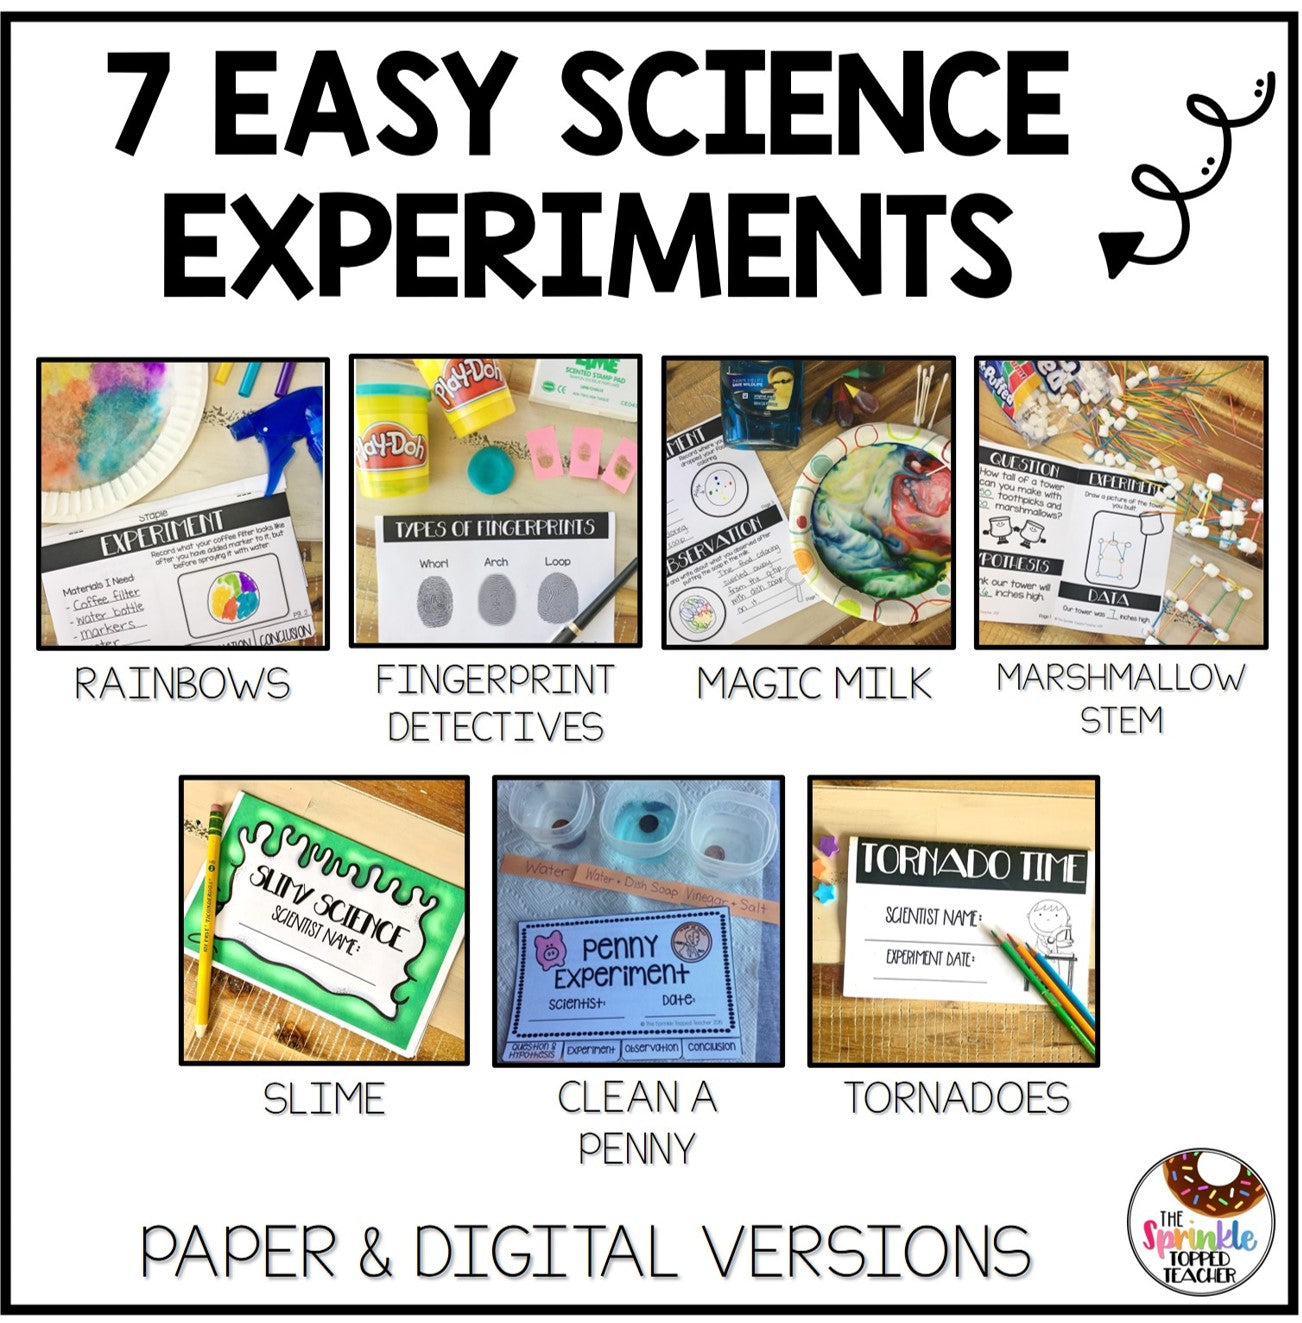 7 Easy Science Experiments to Teach the Scientific Method